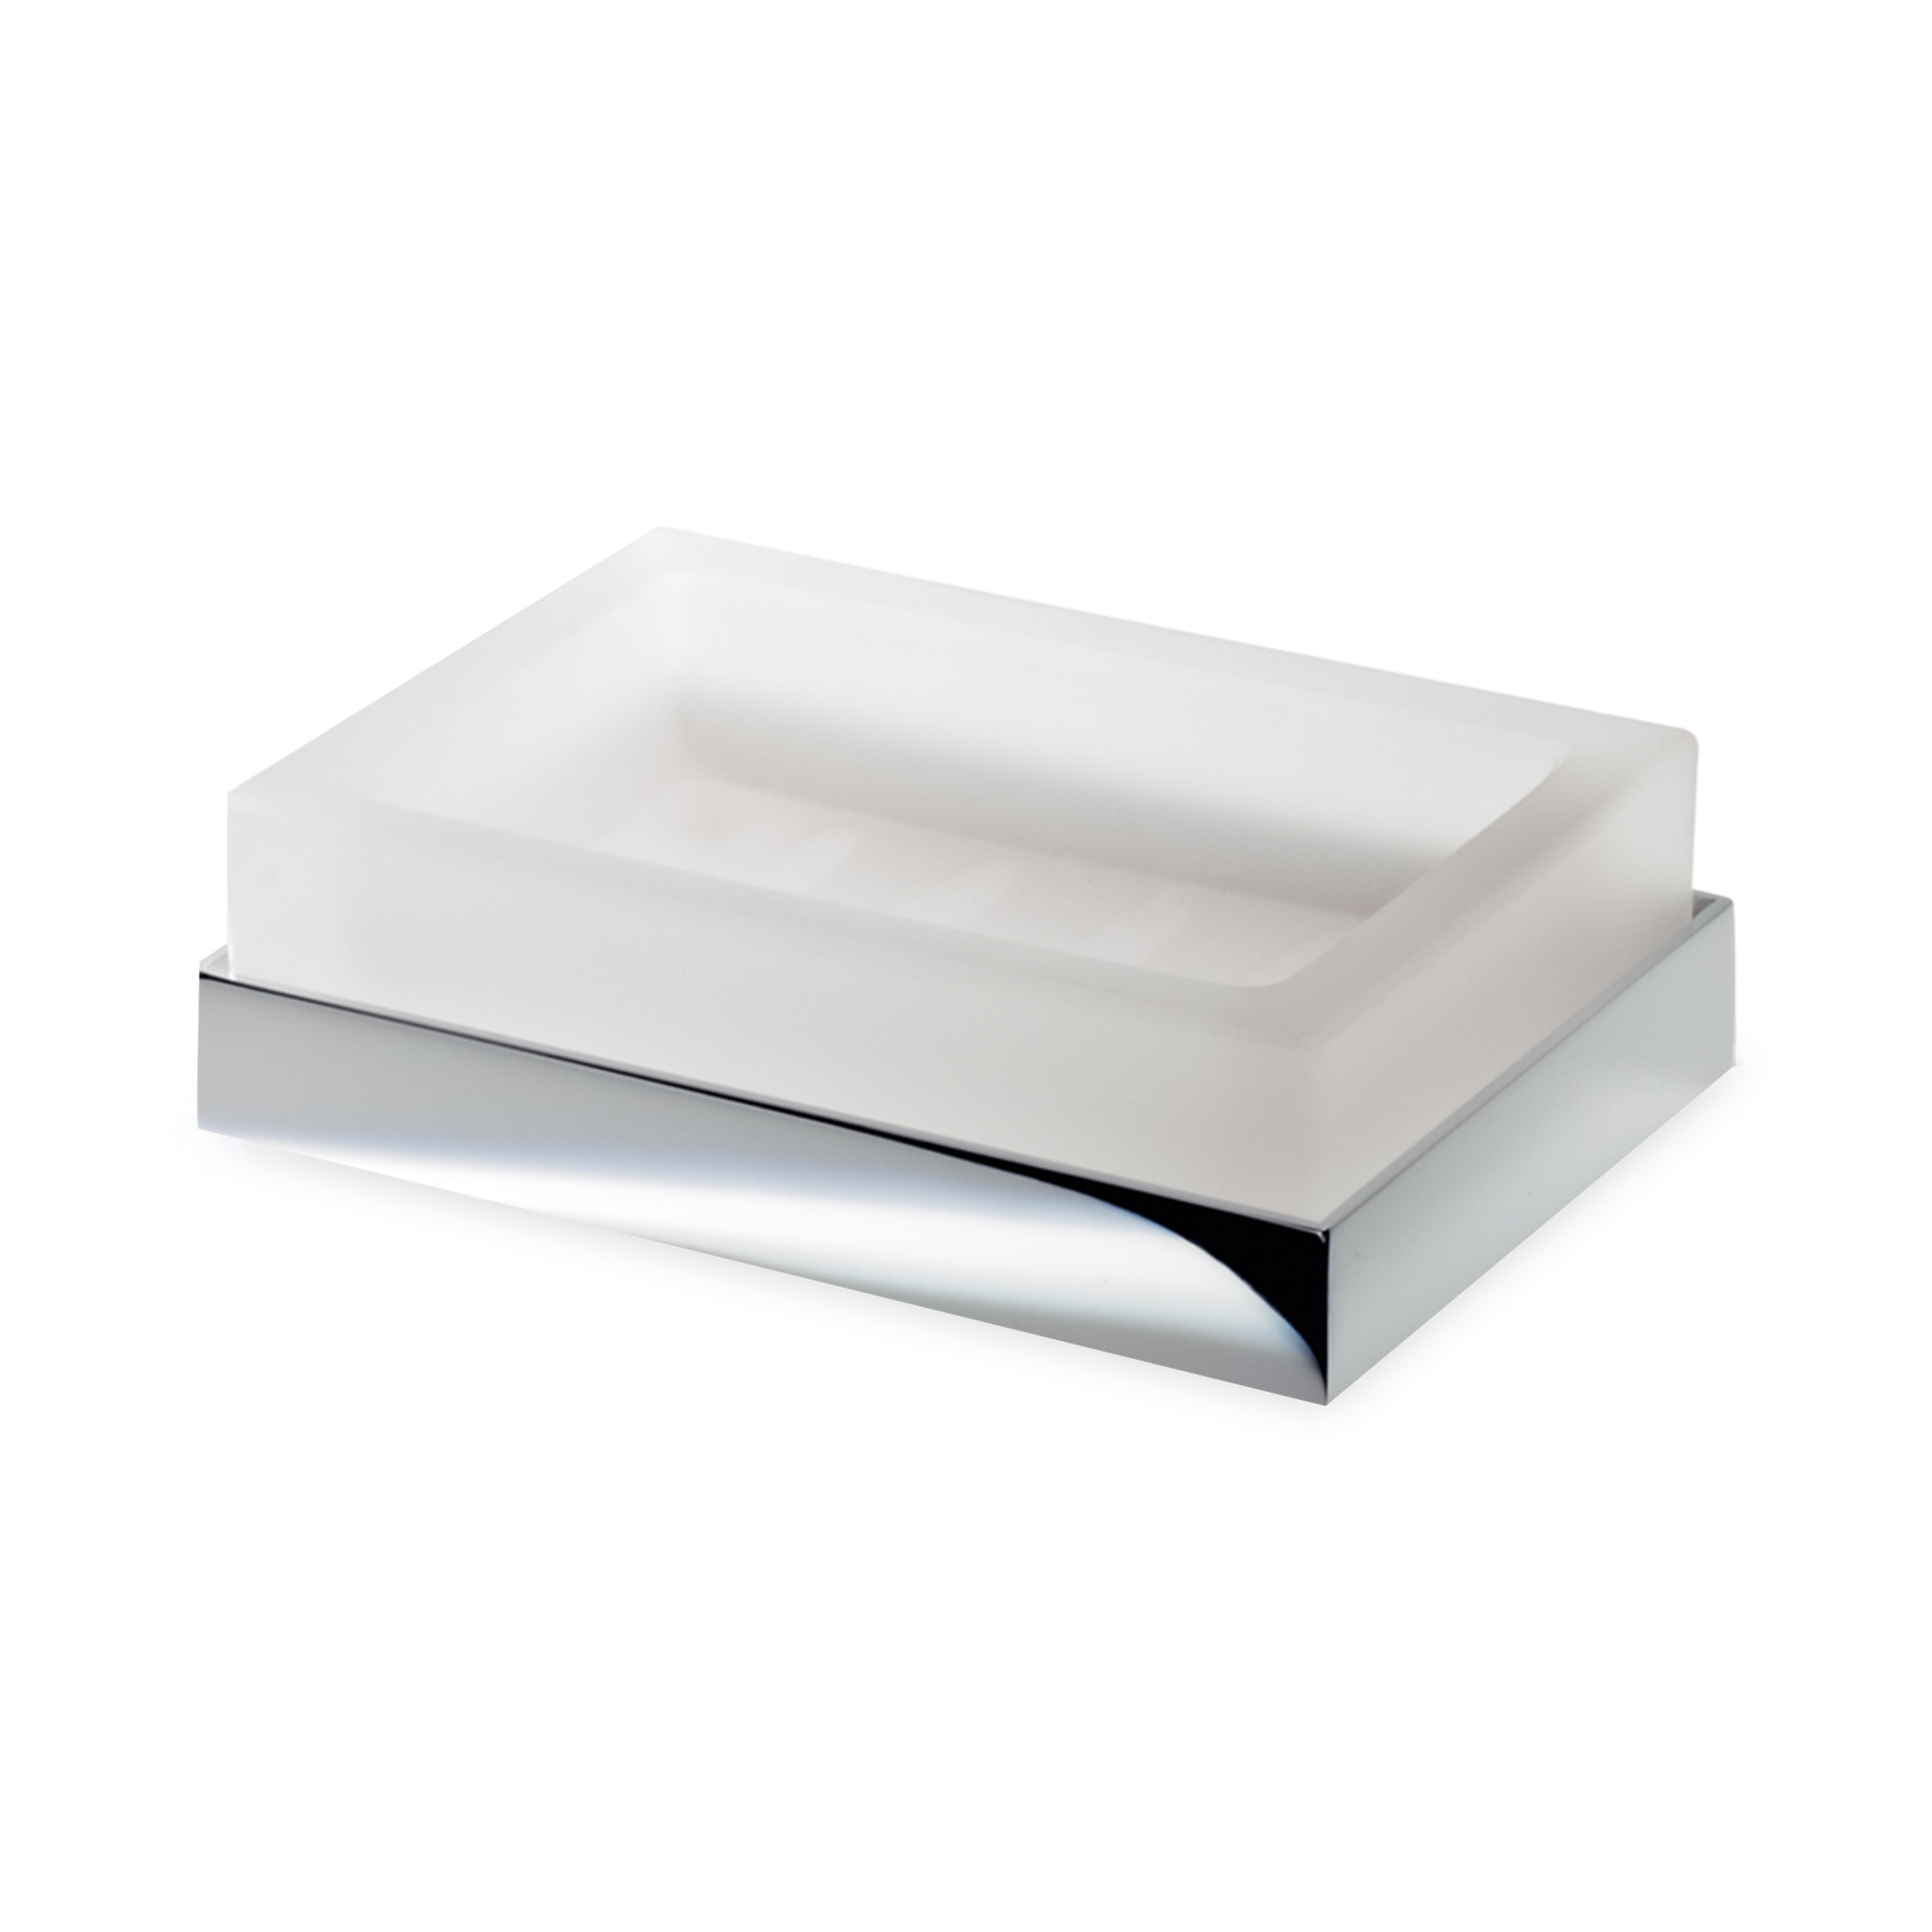 Elegant soap dish with a classic modern styling, crafted in satin glass with a chrome accent.